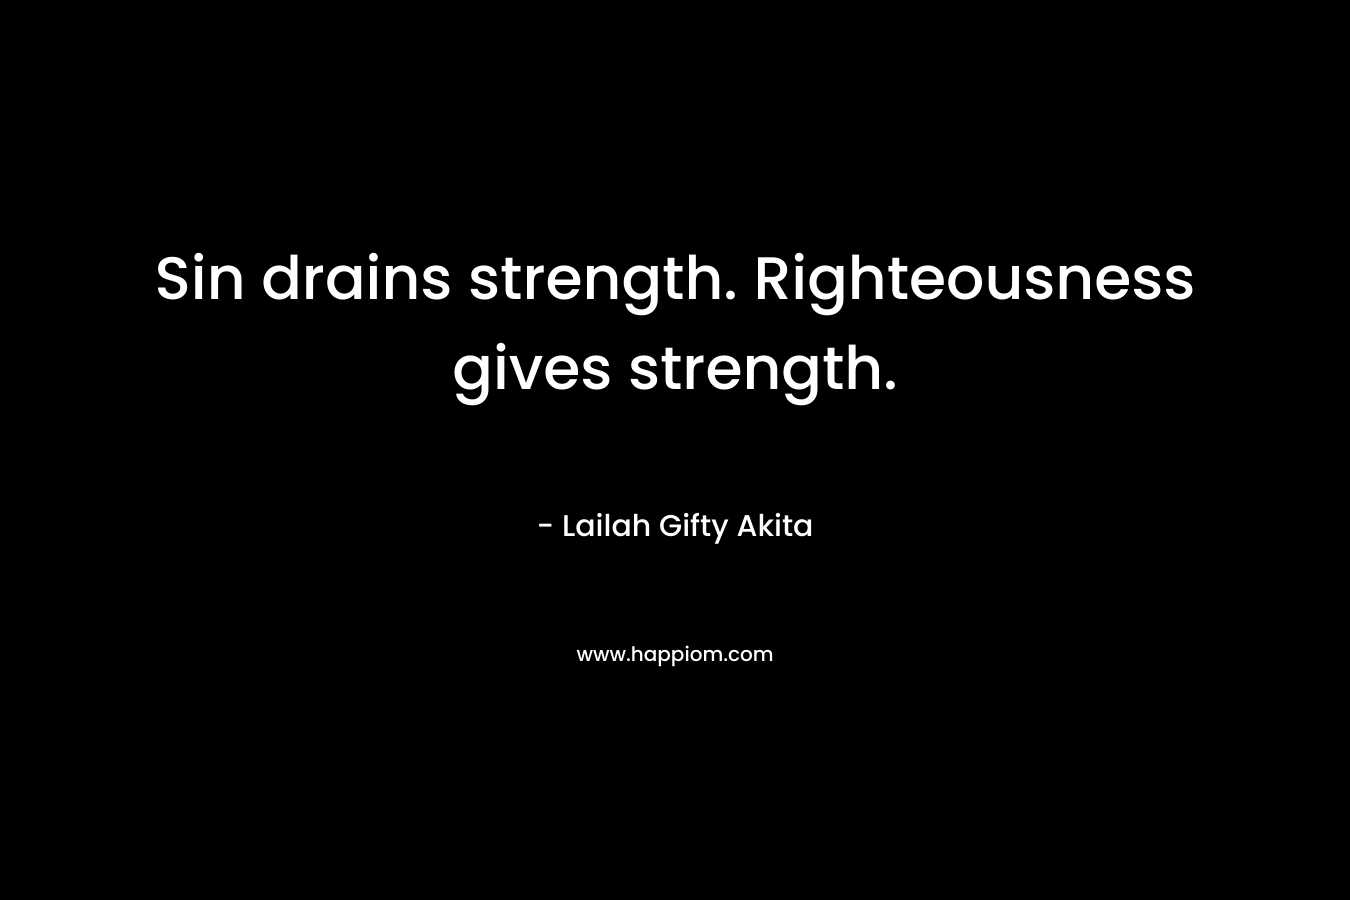 Sin drains strength. Righteousness gives strength. – Lailah Gifty Akita